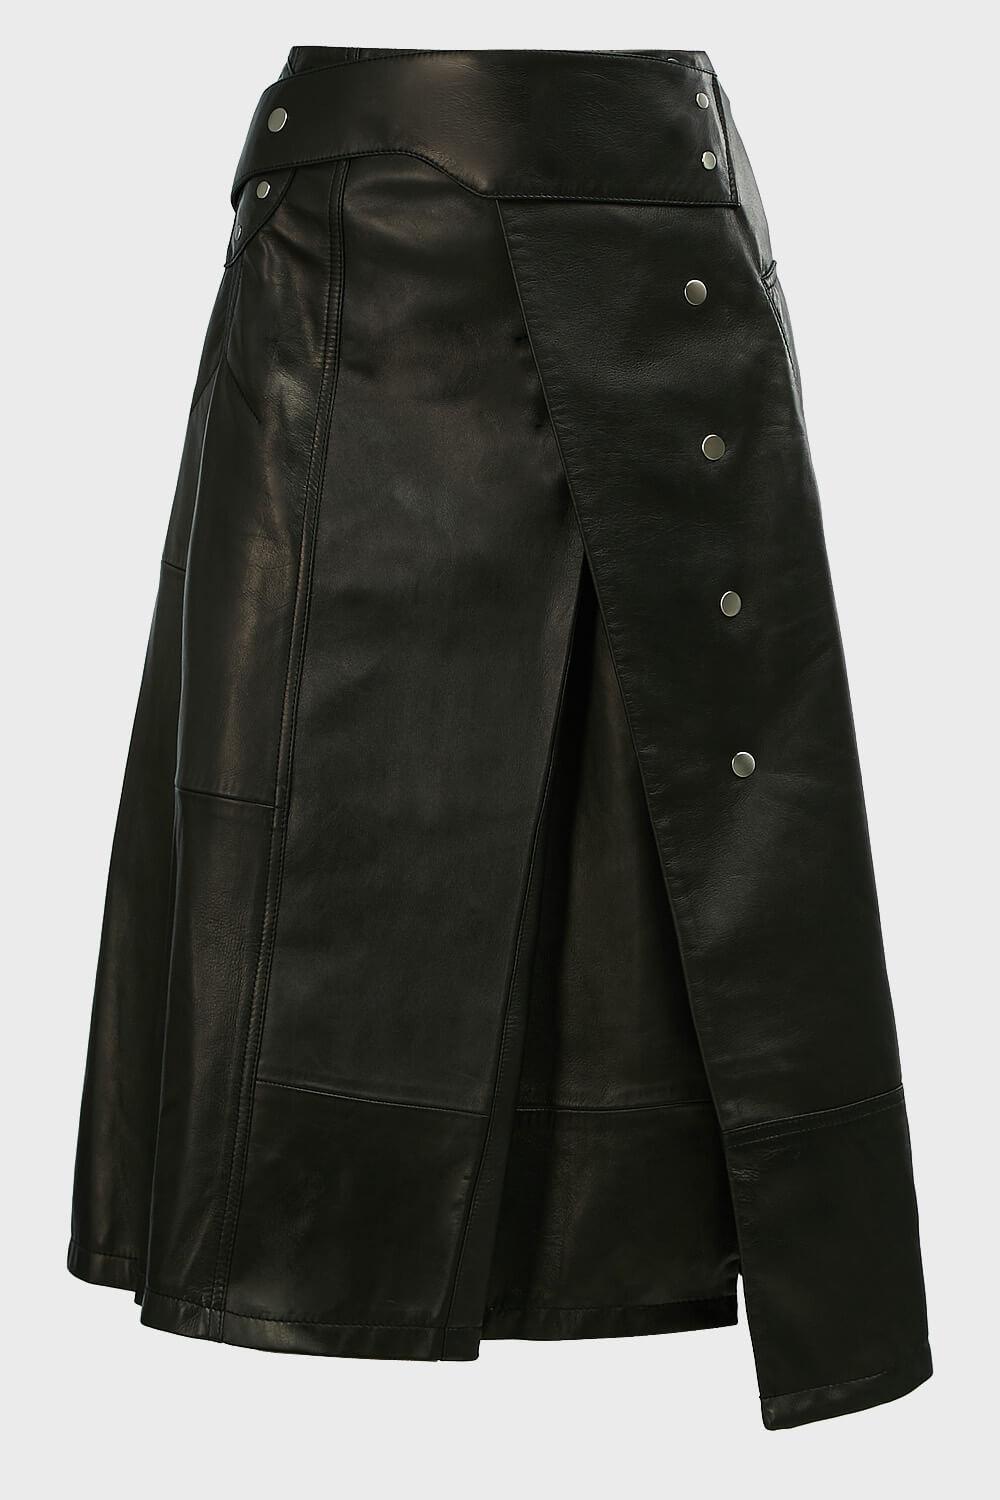 3.1 Phillip Lim Leather Trench Skirt in Black - Save 40% - Lyst